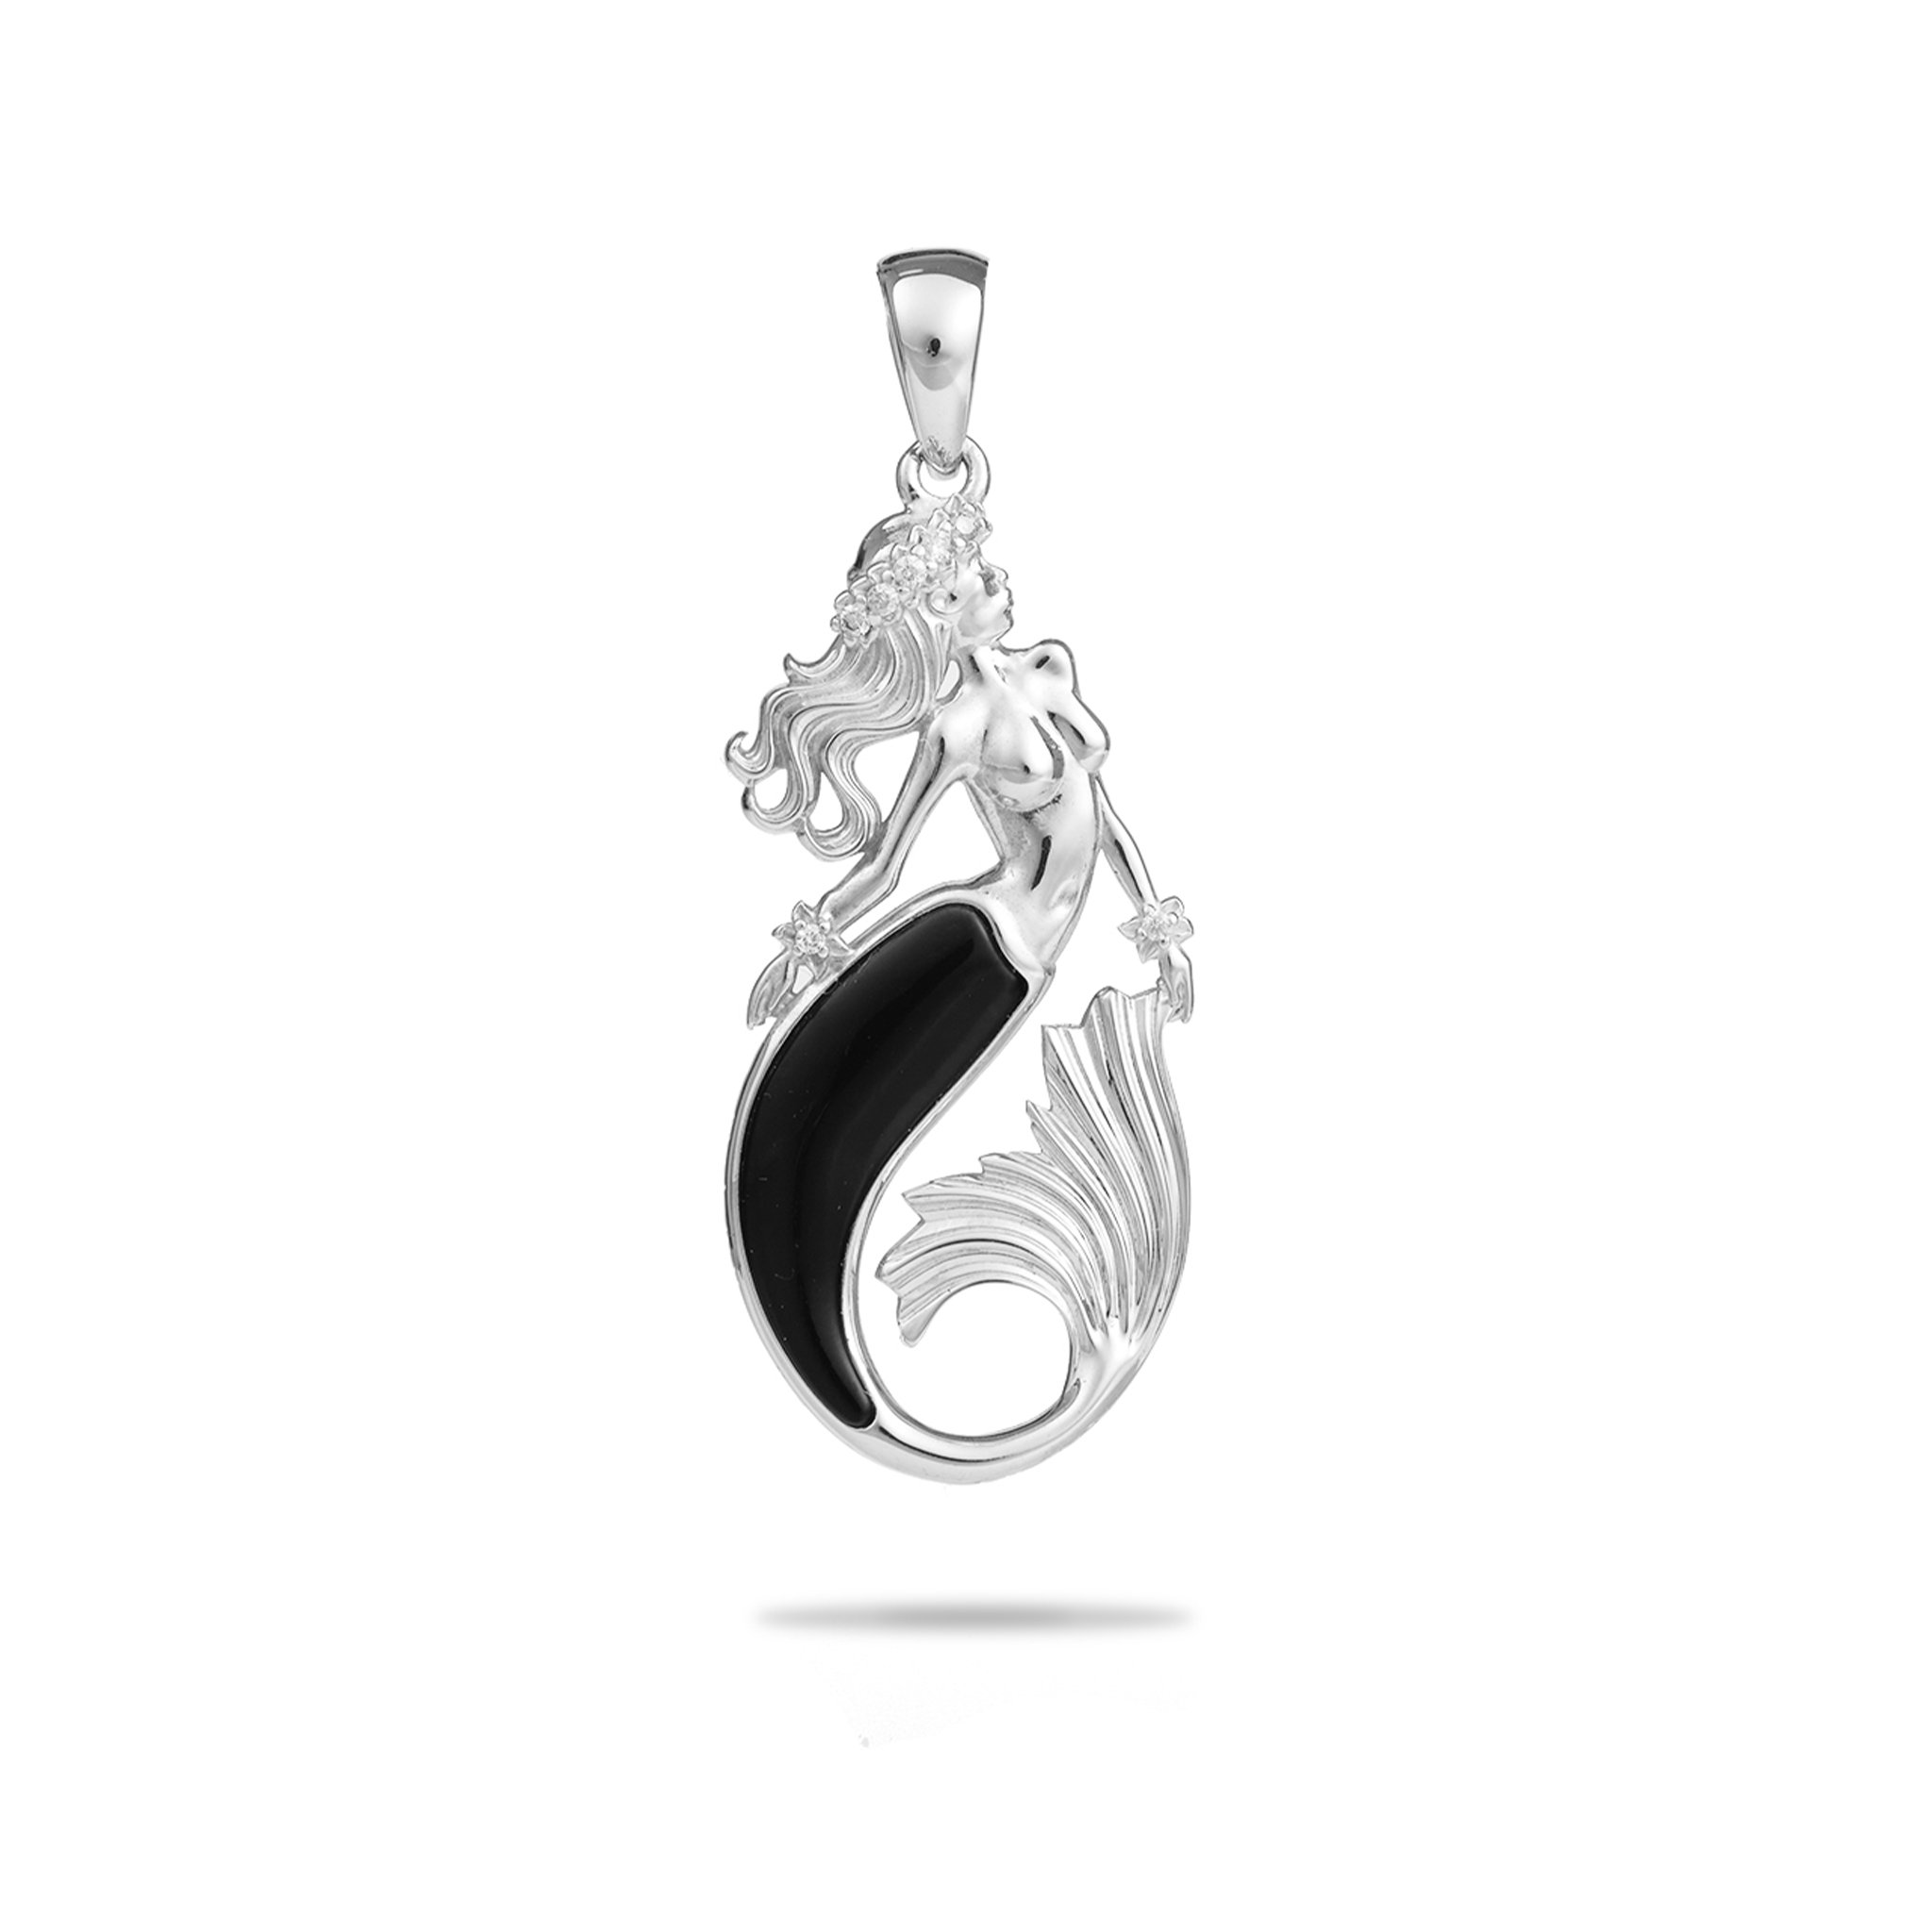 Sealife Mermaid Black Coral Pendant in White Gold with Diamonds - 30mm - Maui Divers Jewelry